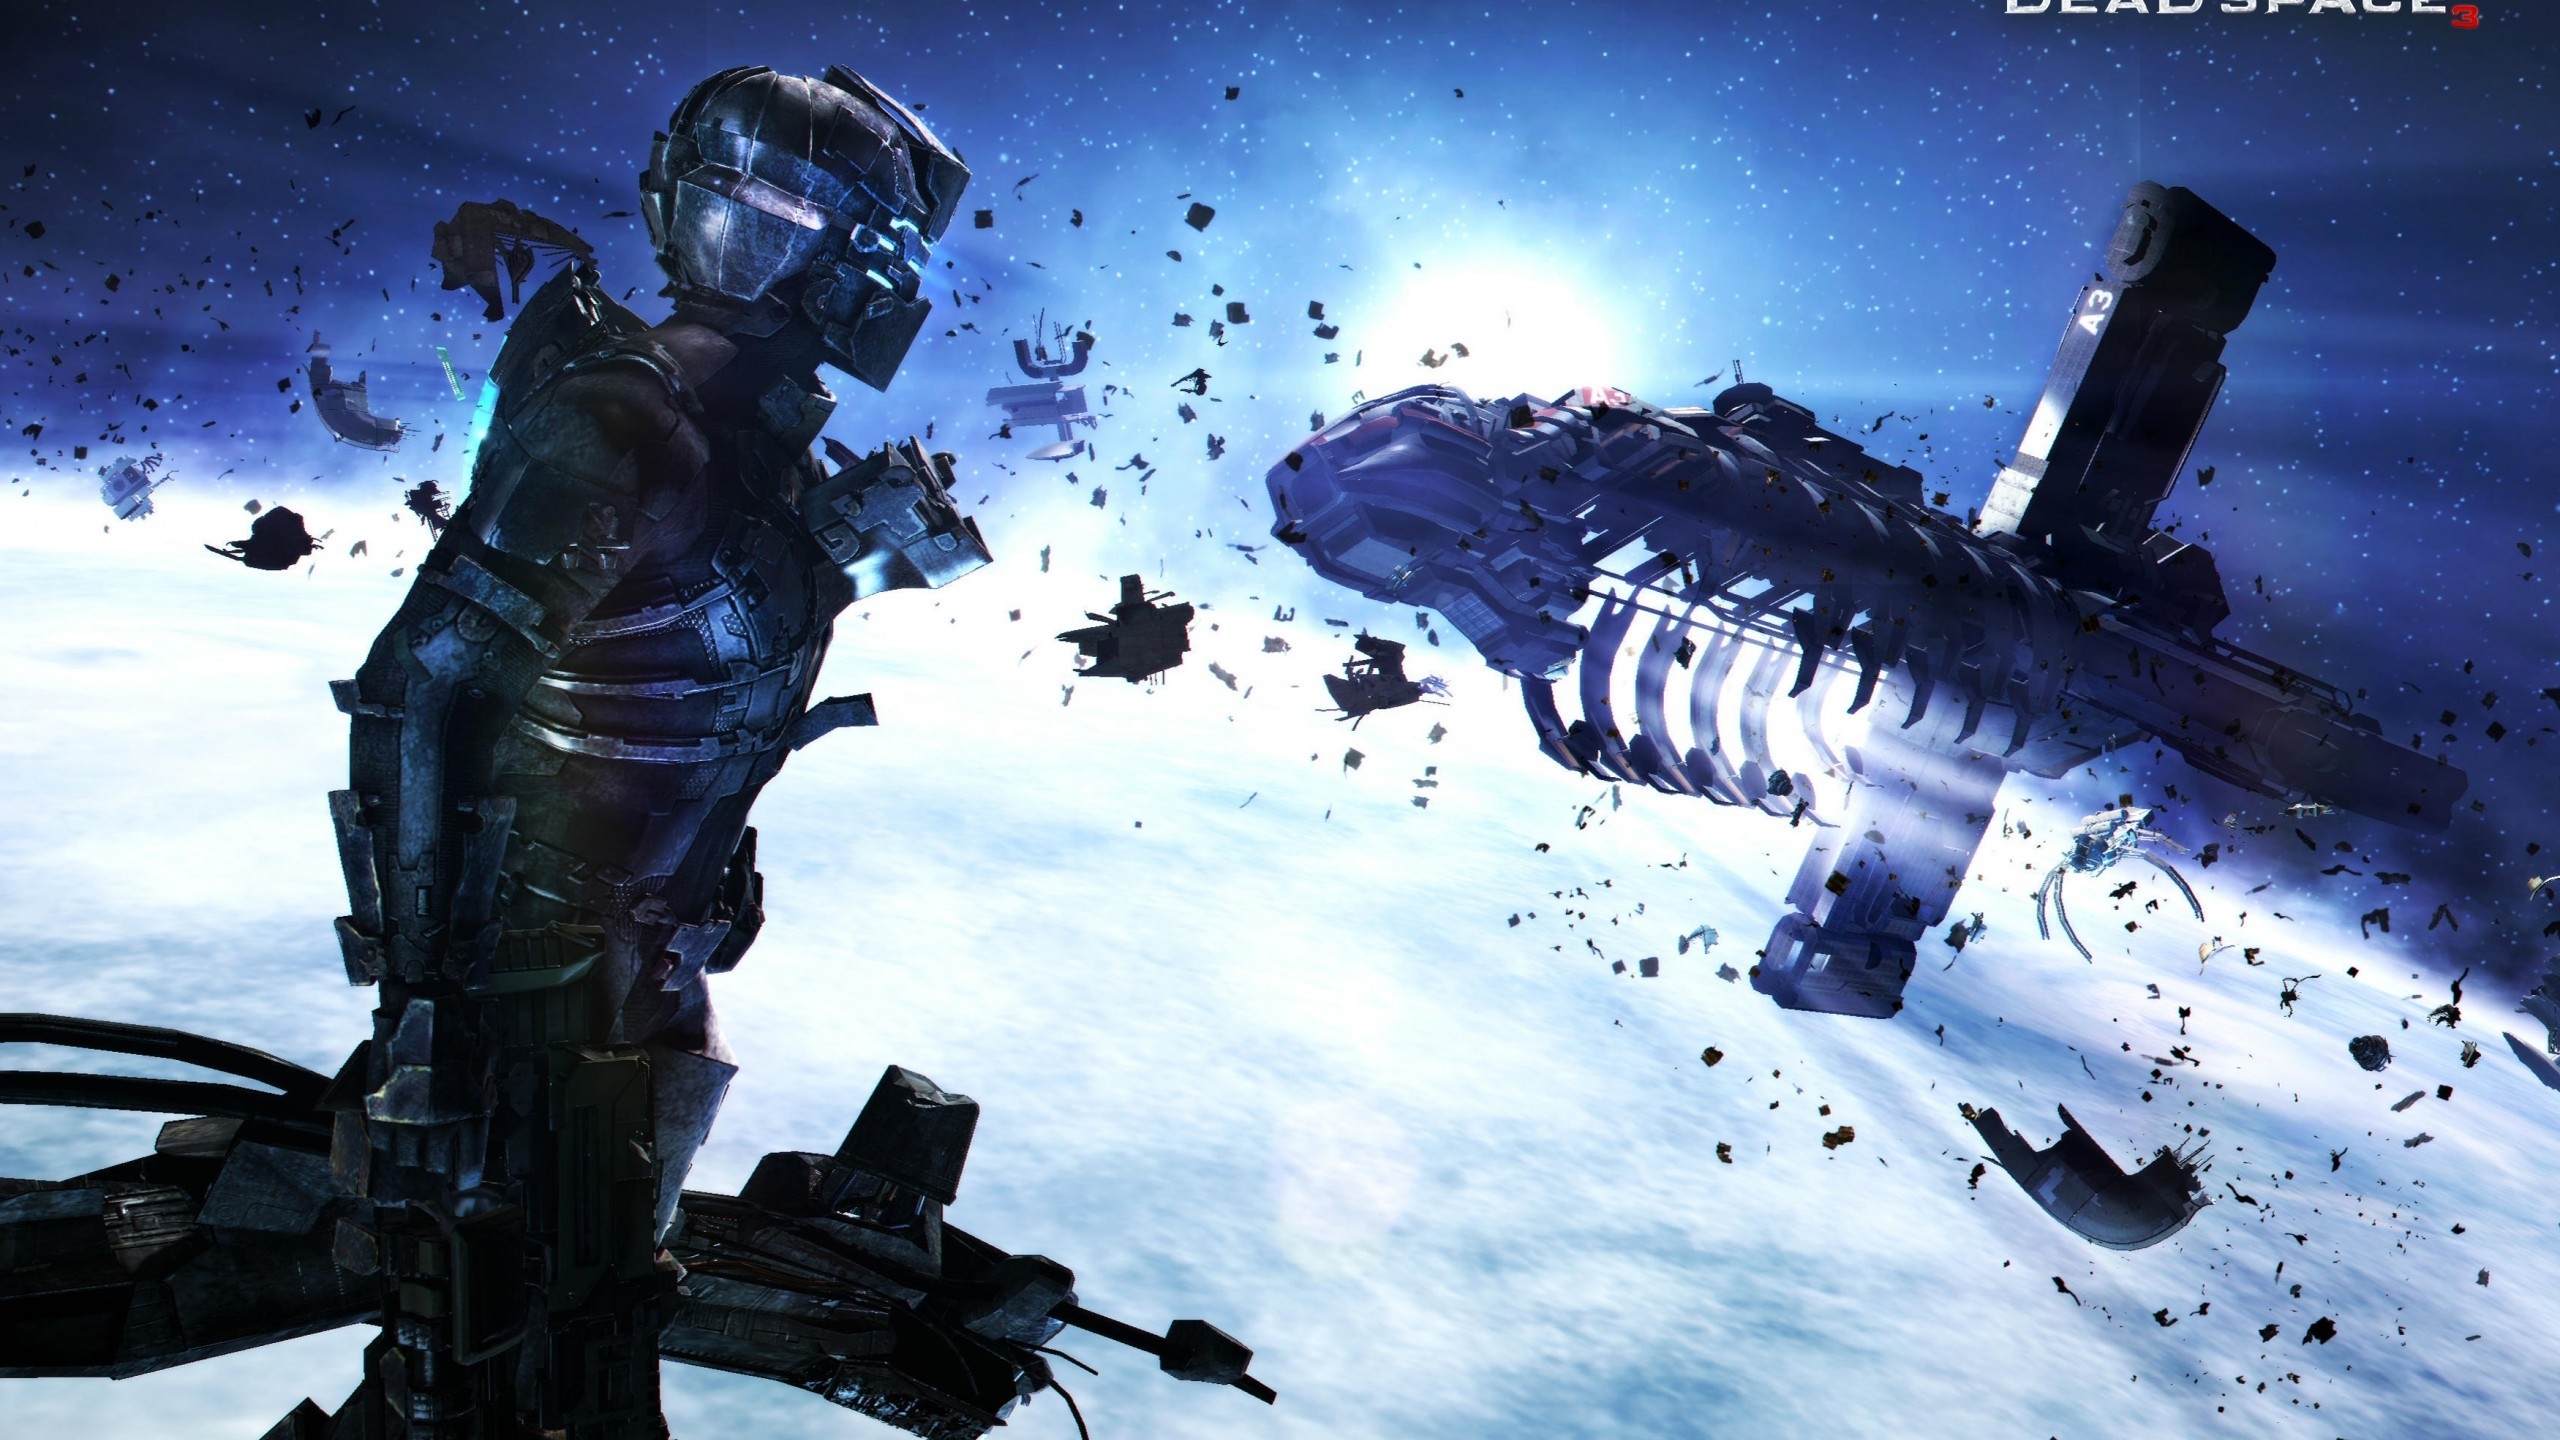 Dead Space 3 Poster for 2560x1440 HDTV resolution